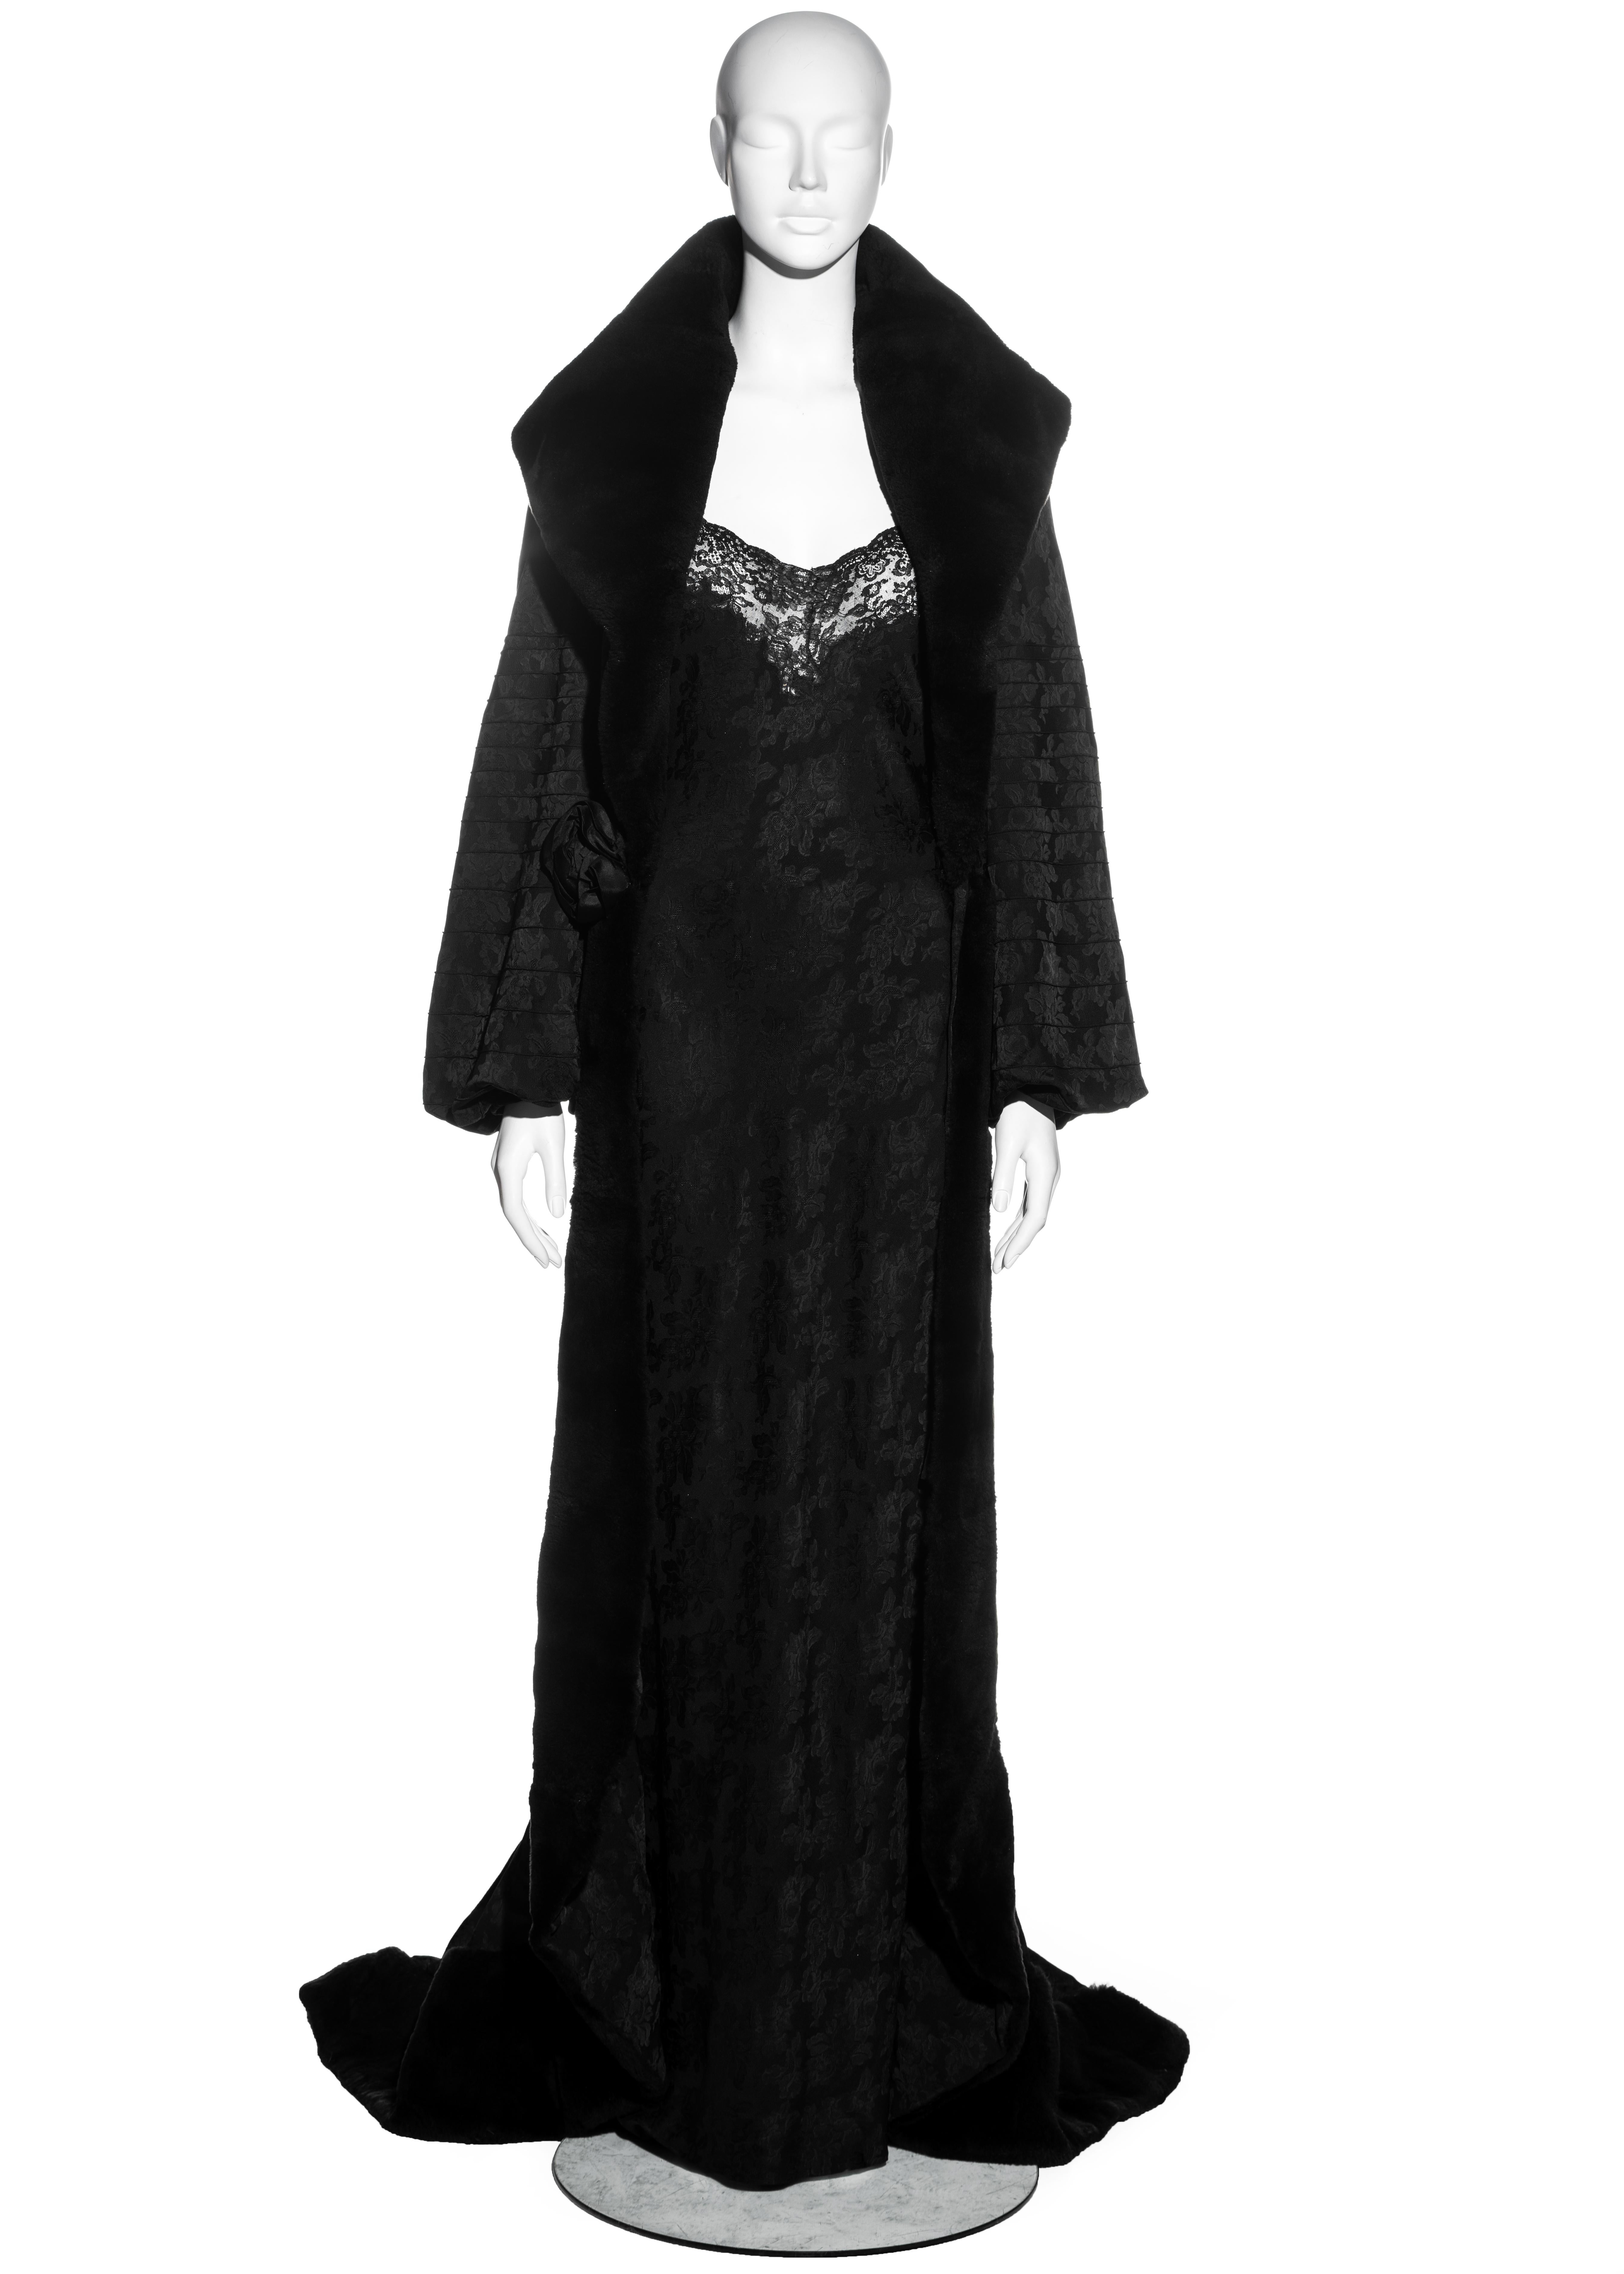 ▪ Christian Dior black jacquard evening coat and dress set
▪ Designed by John Galliano
▪ Jacquard 76% Acetate, 24% Viscose
▪ Lining 100% Silk
▪ Large fur collar and trim 
▪ Pin-tucked detail on poet sleeves 
▪ Silk rosette appliques at centre